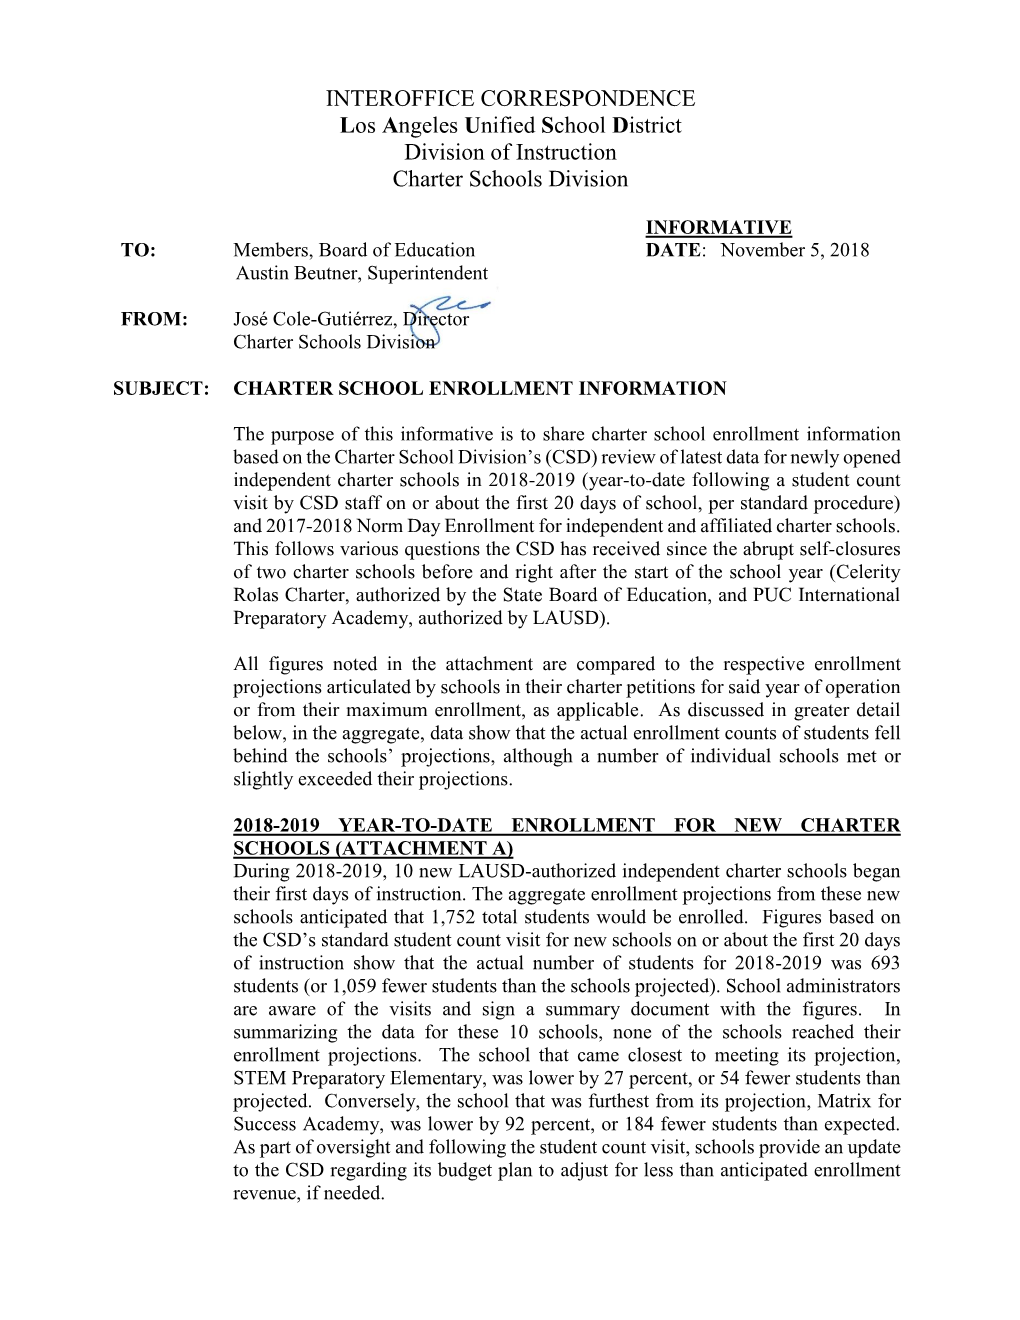 INTEROFFICE CORRESPONDENCE Los Angeles Unified School District Division of Instruction Charter Schools Division